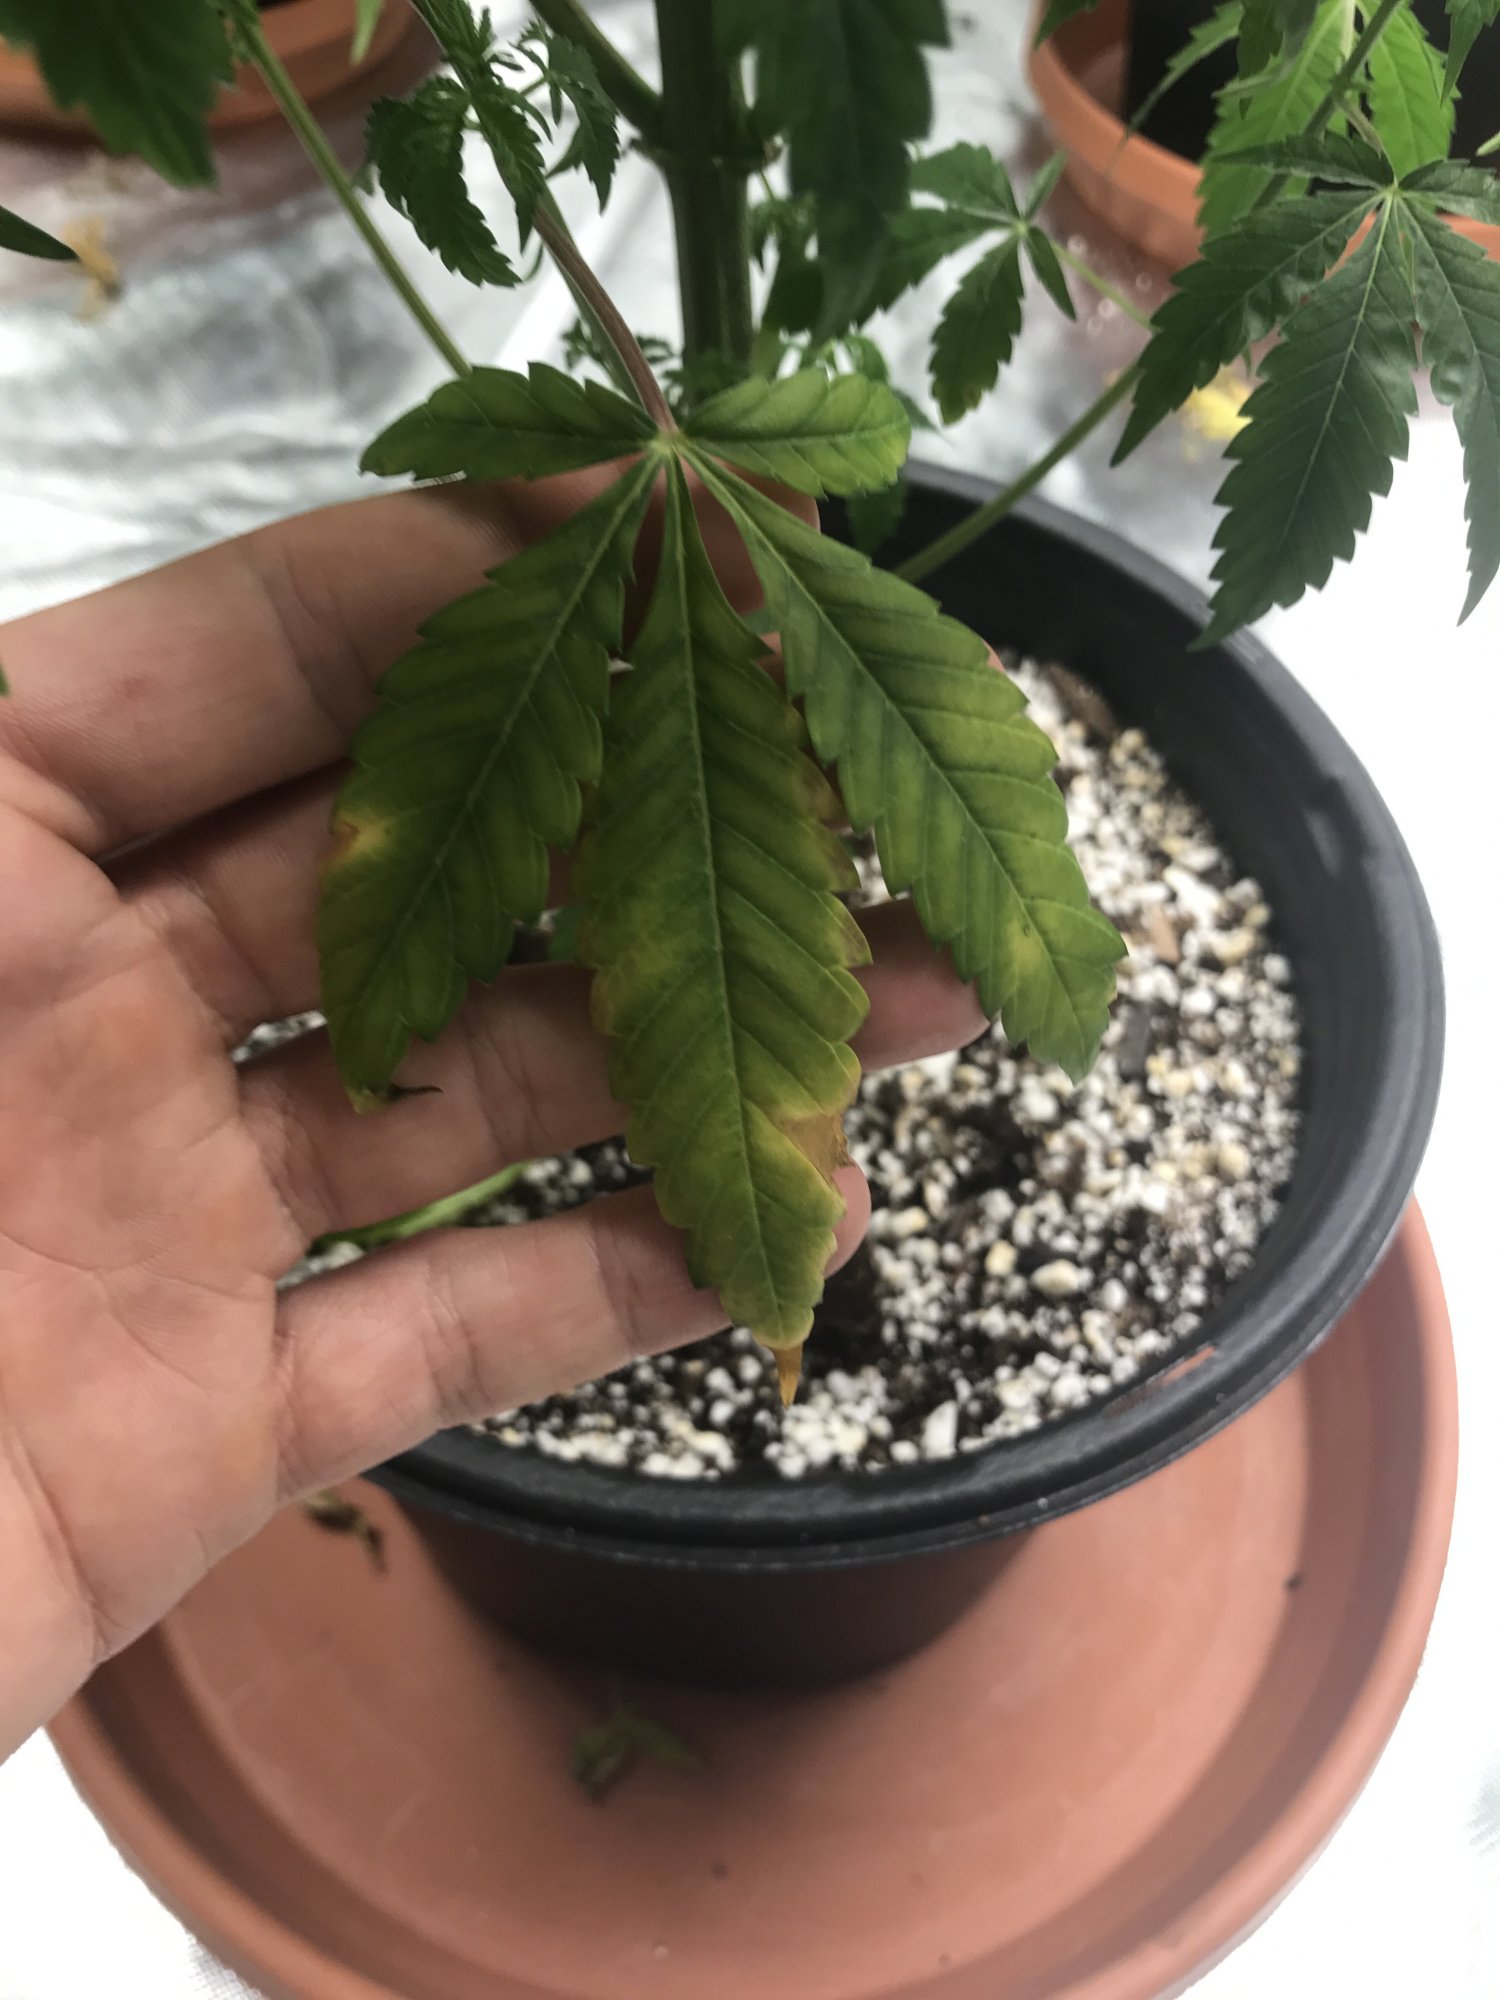 Need help 1st grow deficiency or excess 4